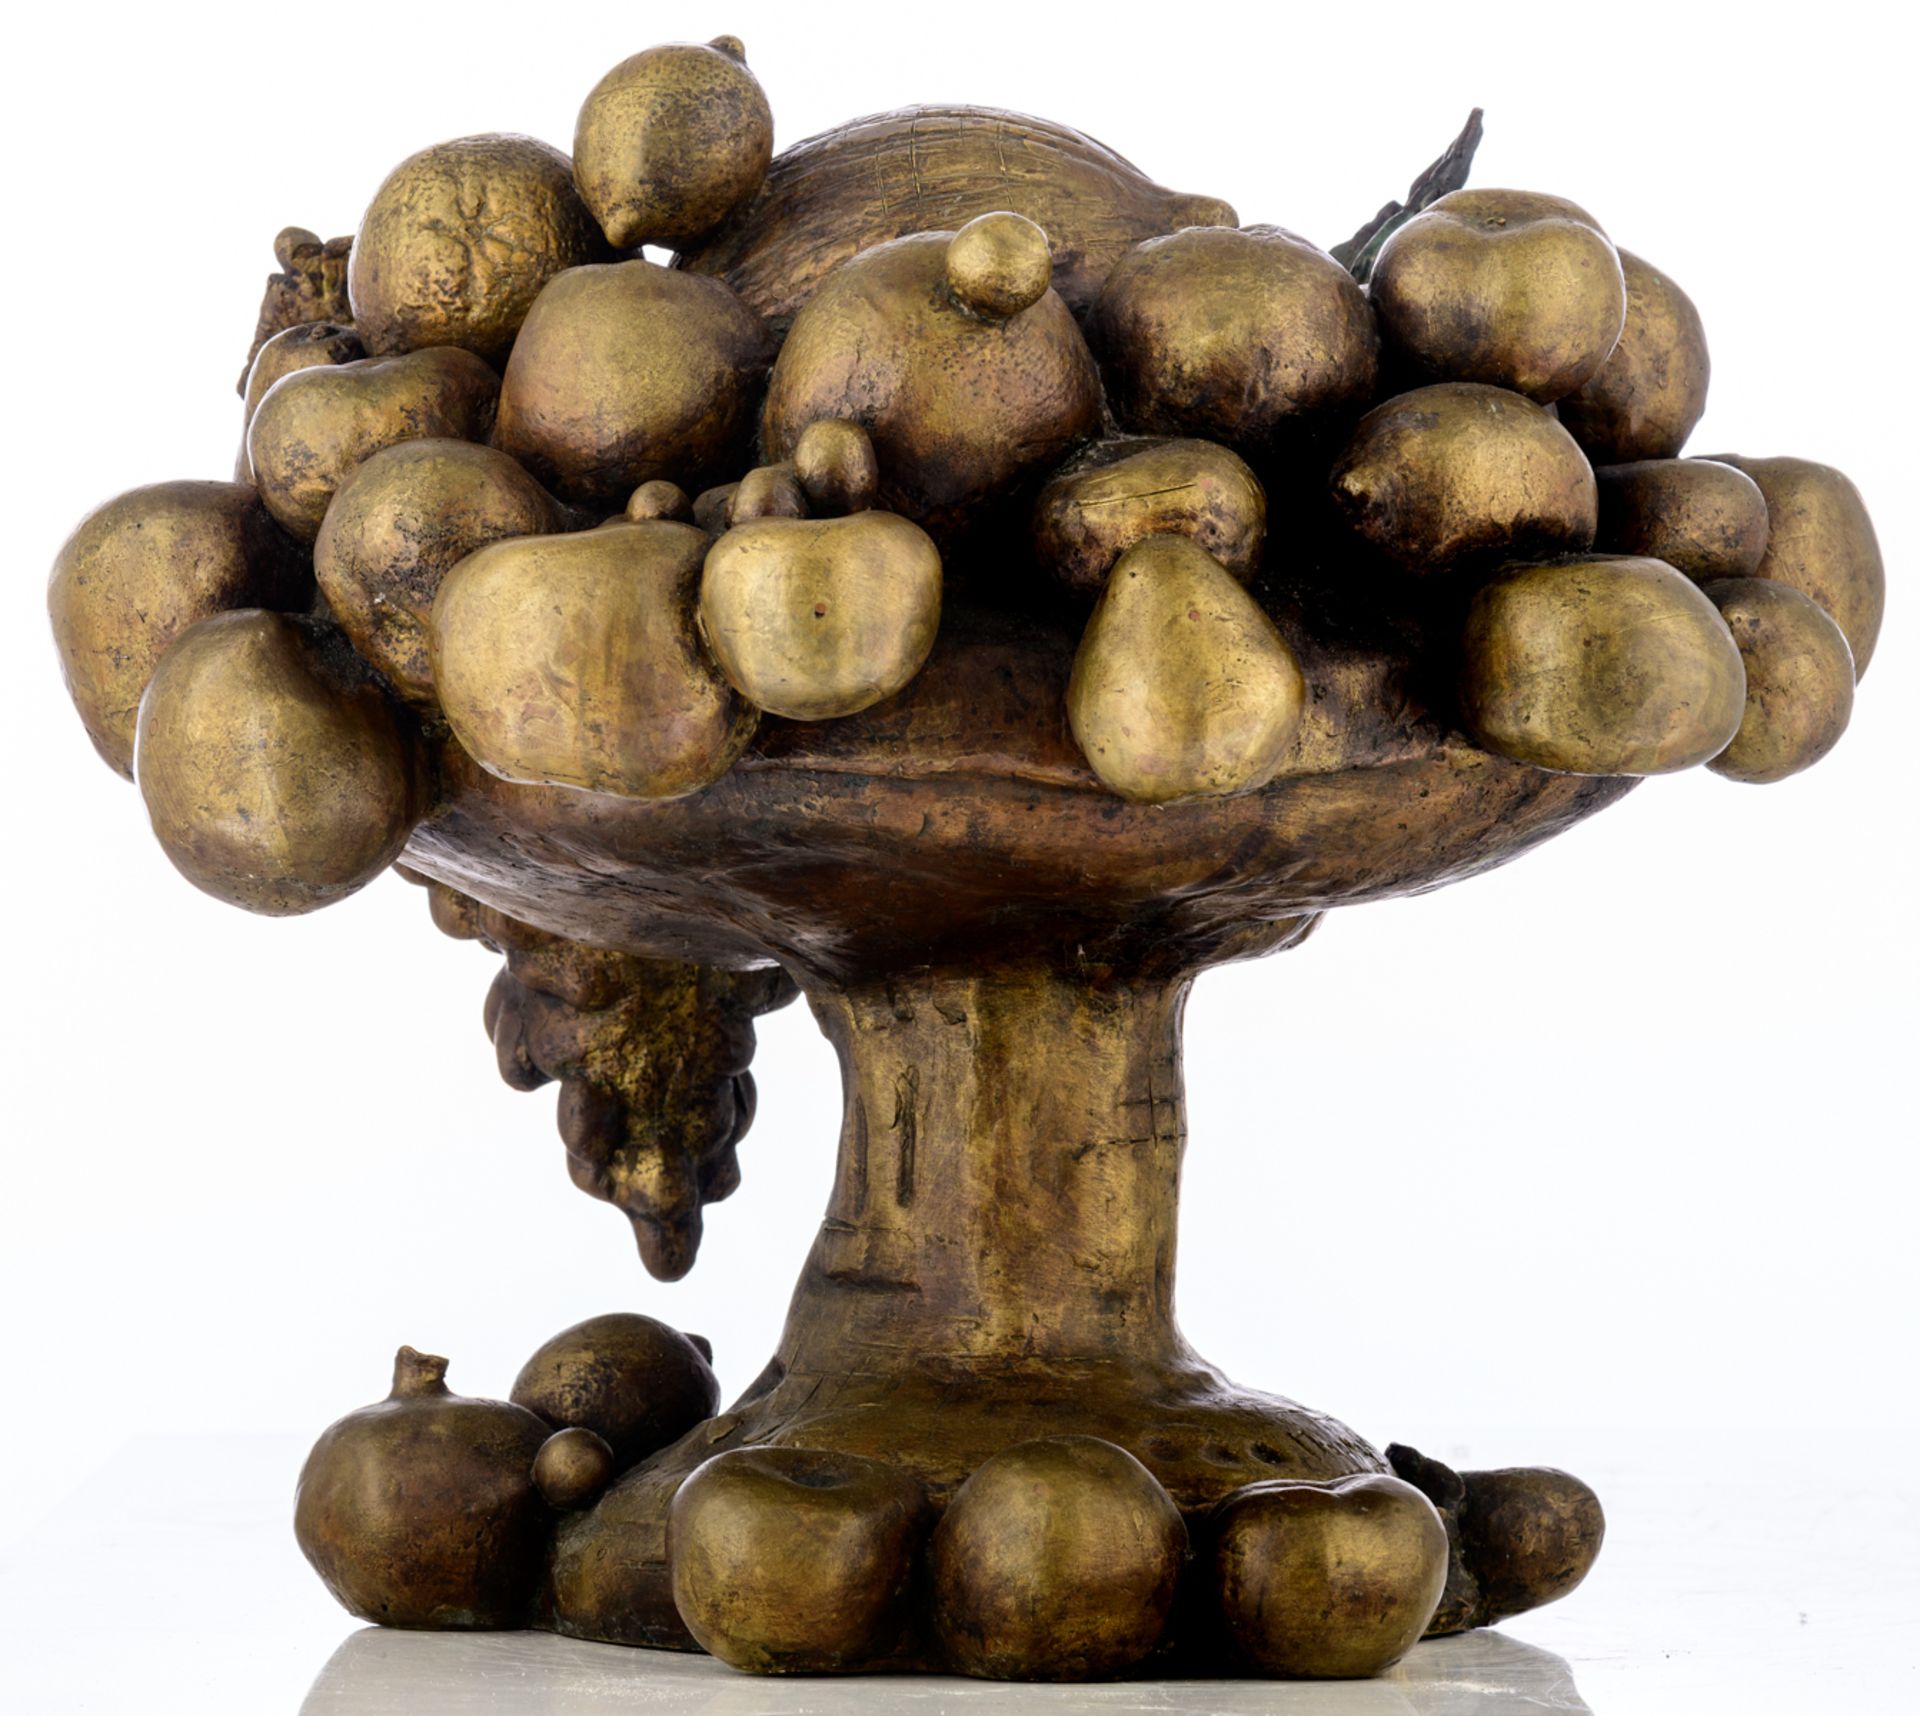 Parmakelis Y., 'Fruit Bowl', dated (19)78, patinated bronze, H 45 cm; added: a book about the artist - Bild 2 aus 8